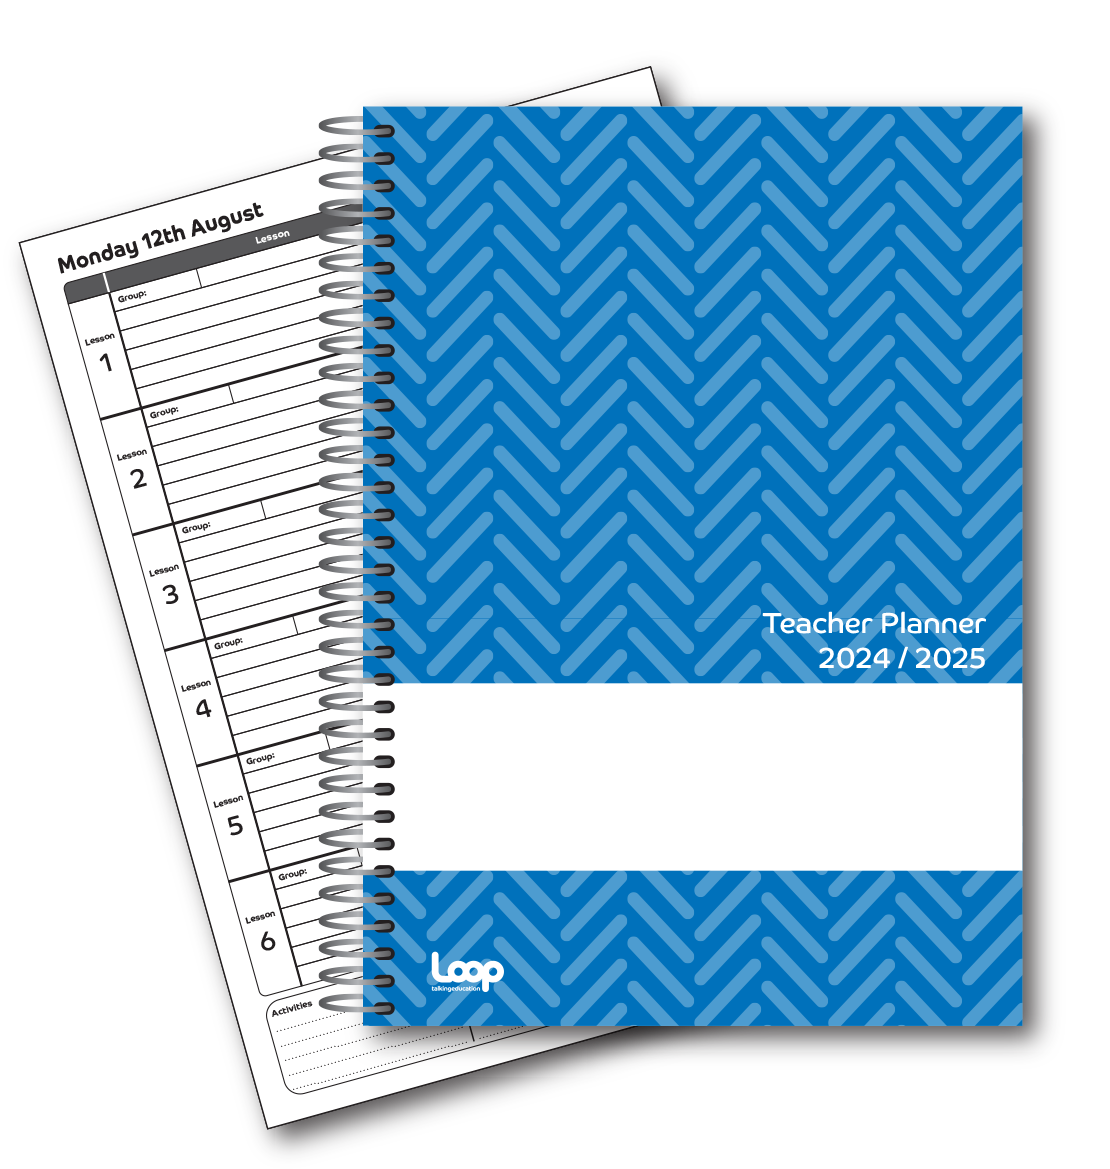 6 Lesson Dated Teacher Planner A5 size